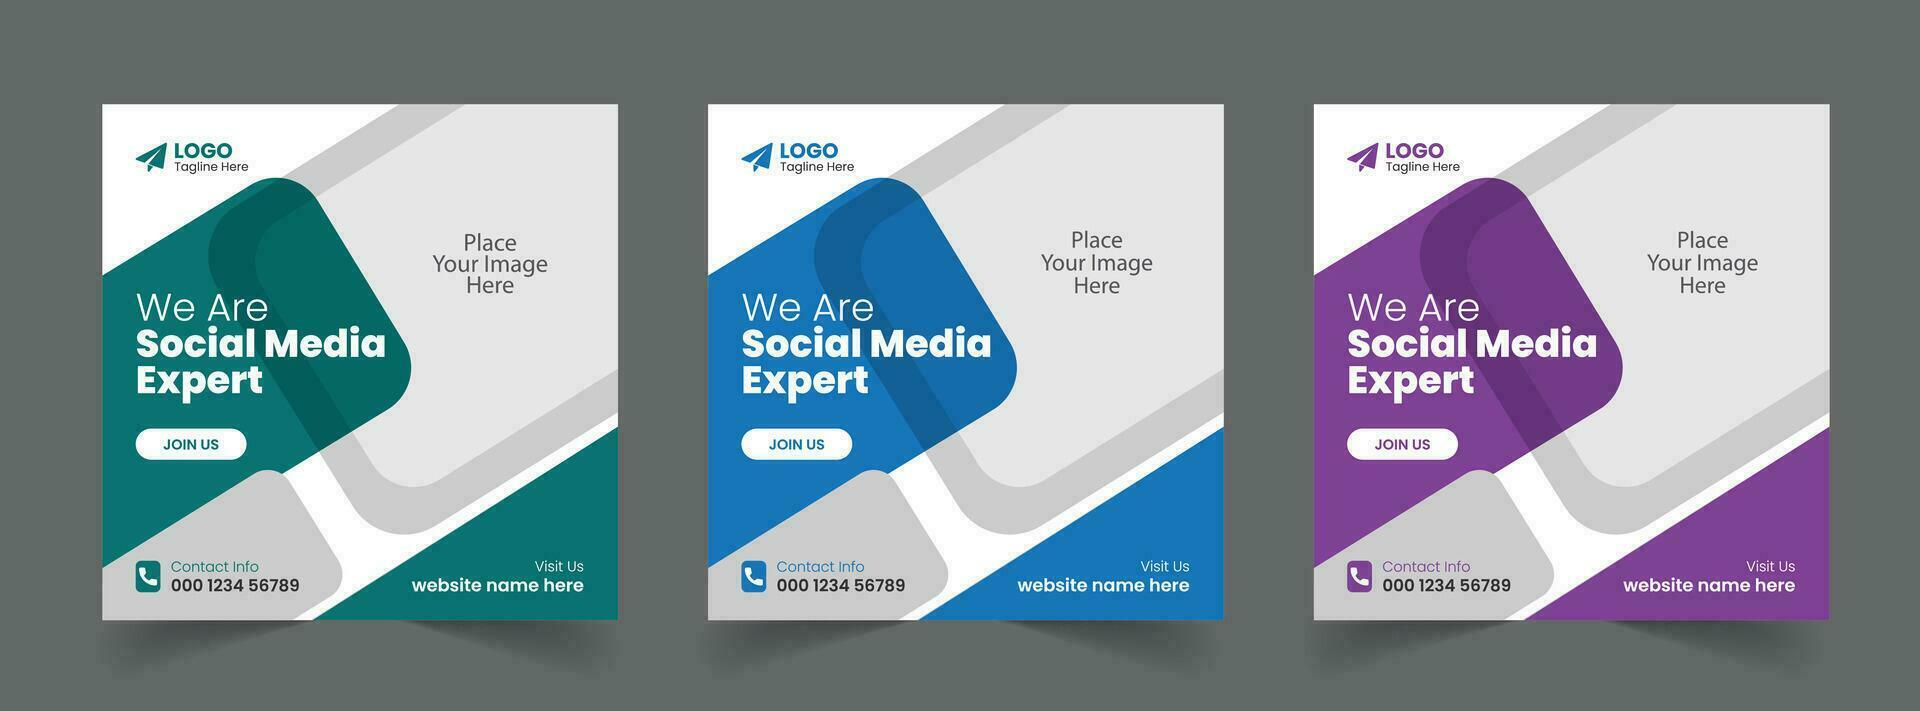 Free Vector Corporate Business Promotion Digital Agency Social Media Post Template Web Banner Design